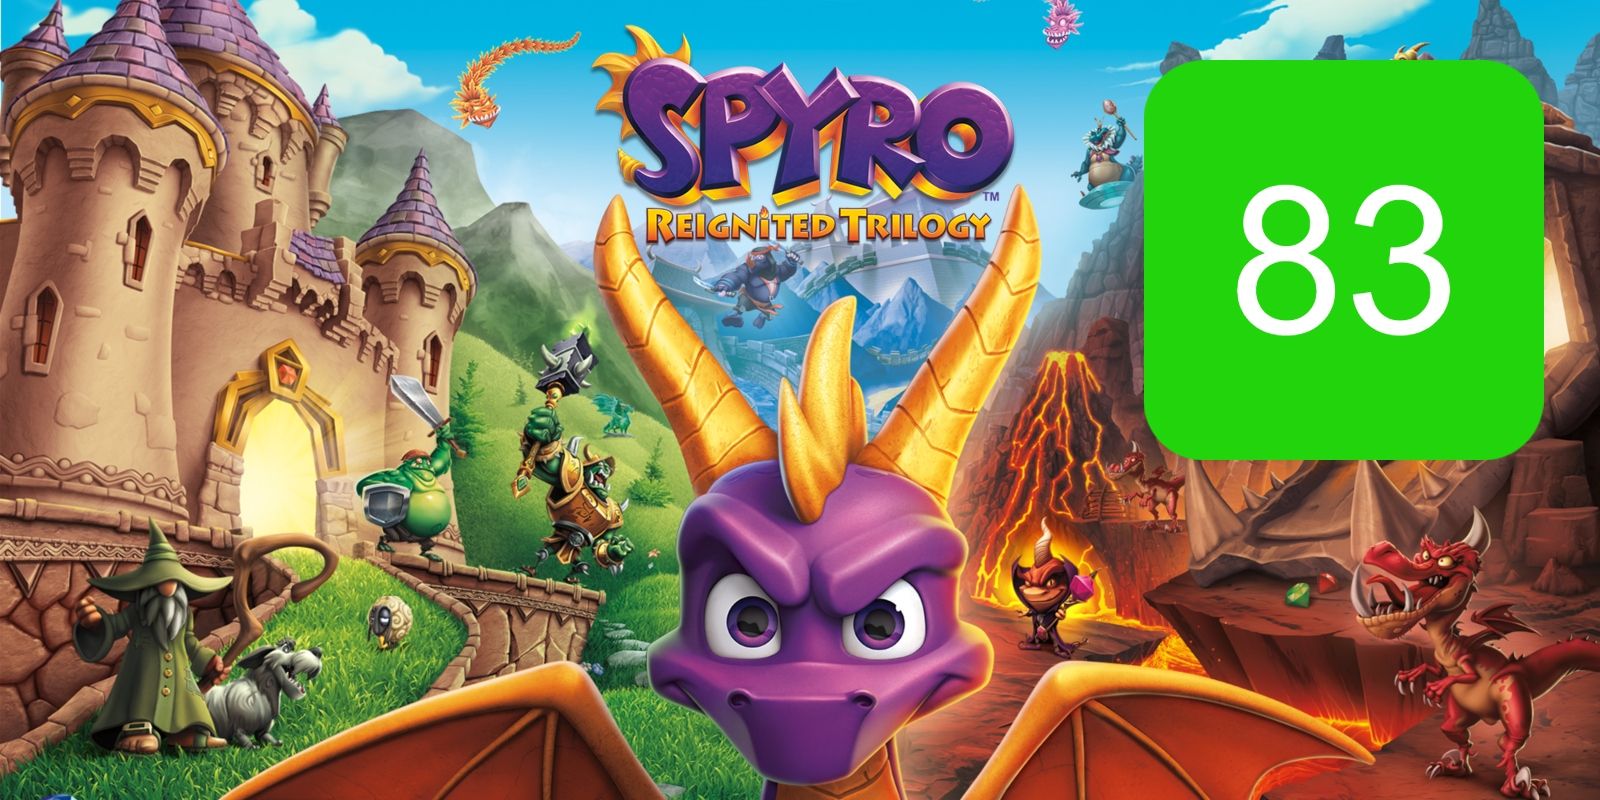 The metascore for spyro reignited trilogy for the xbox one